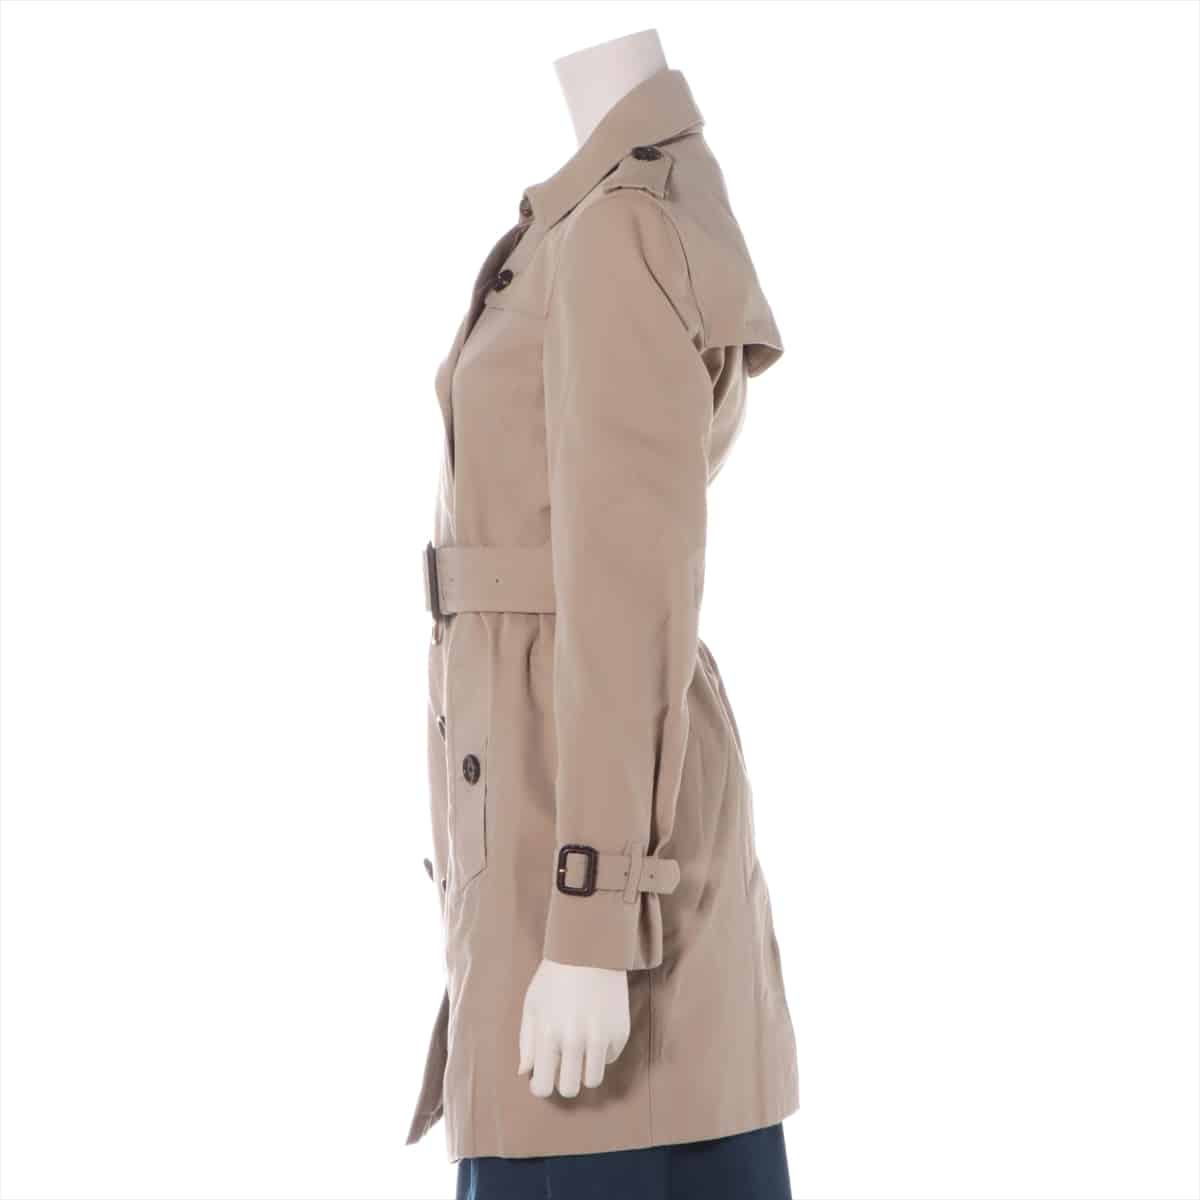 Burberry Kensington Cotton Trench coat UK 4 Ladies' Beige  There are spots on the armpits